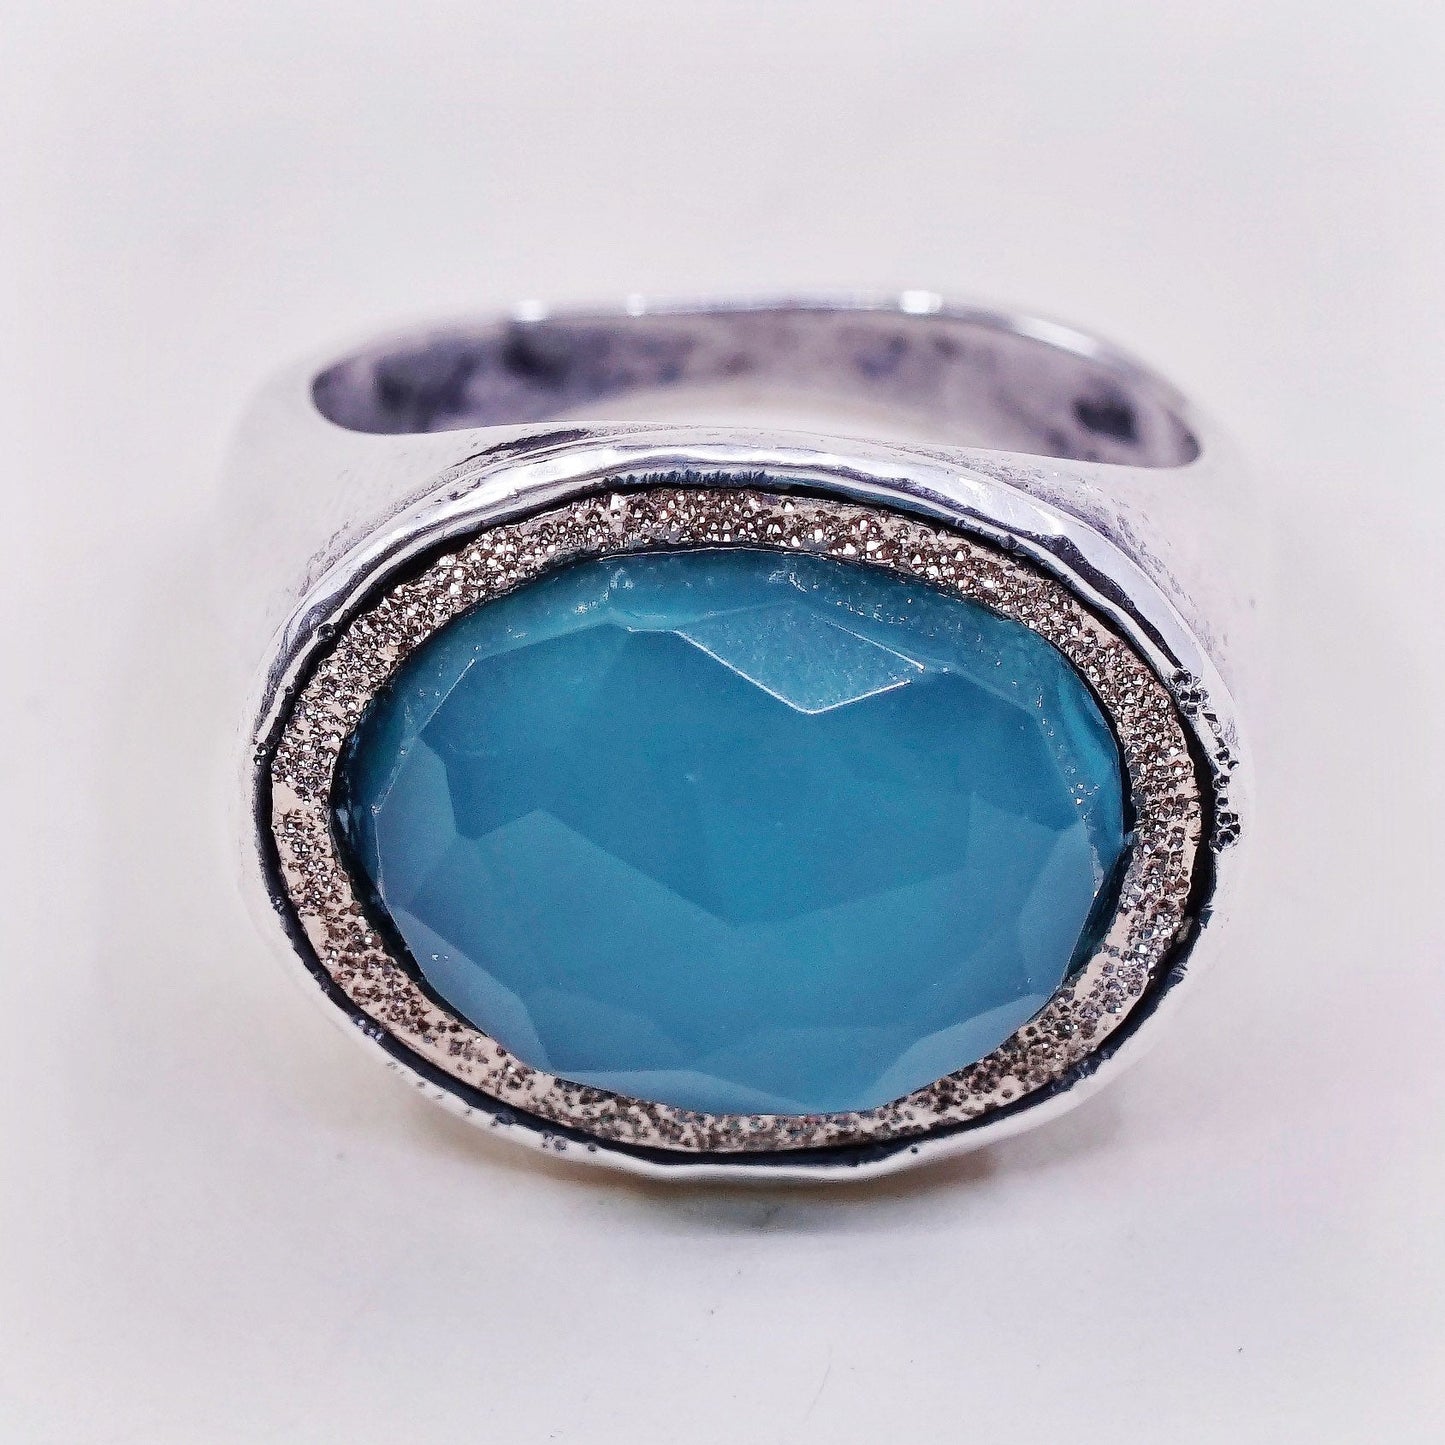 Size 8.5, VTG 14K trim w/ Sterling 925 silver statement ring and chalcedony